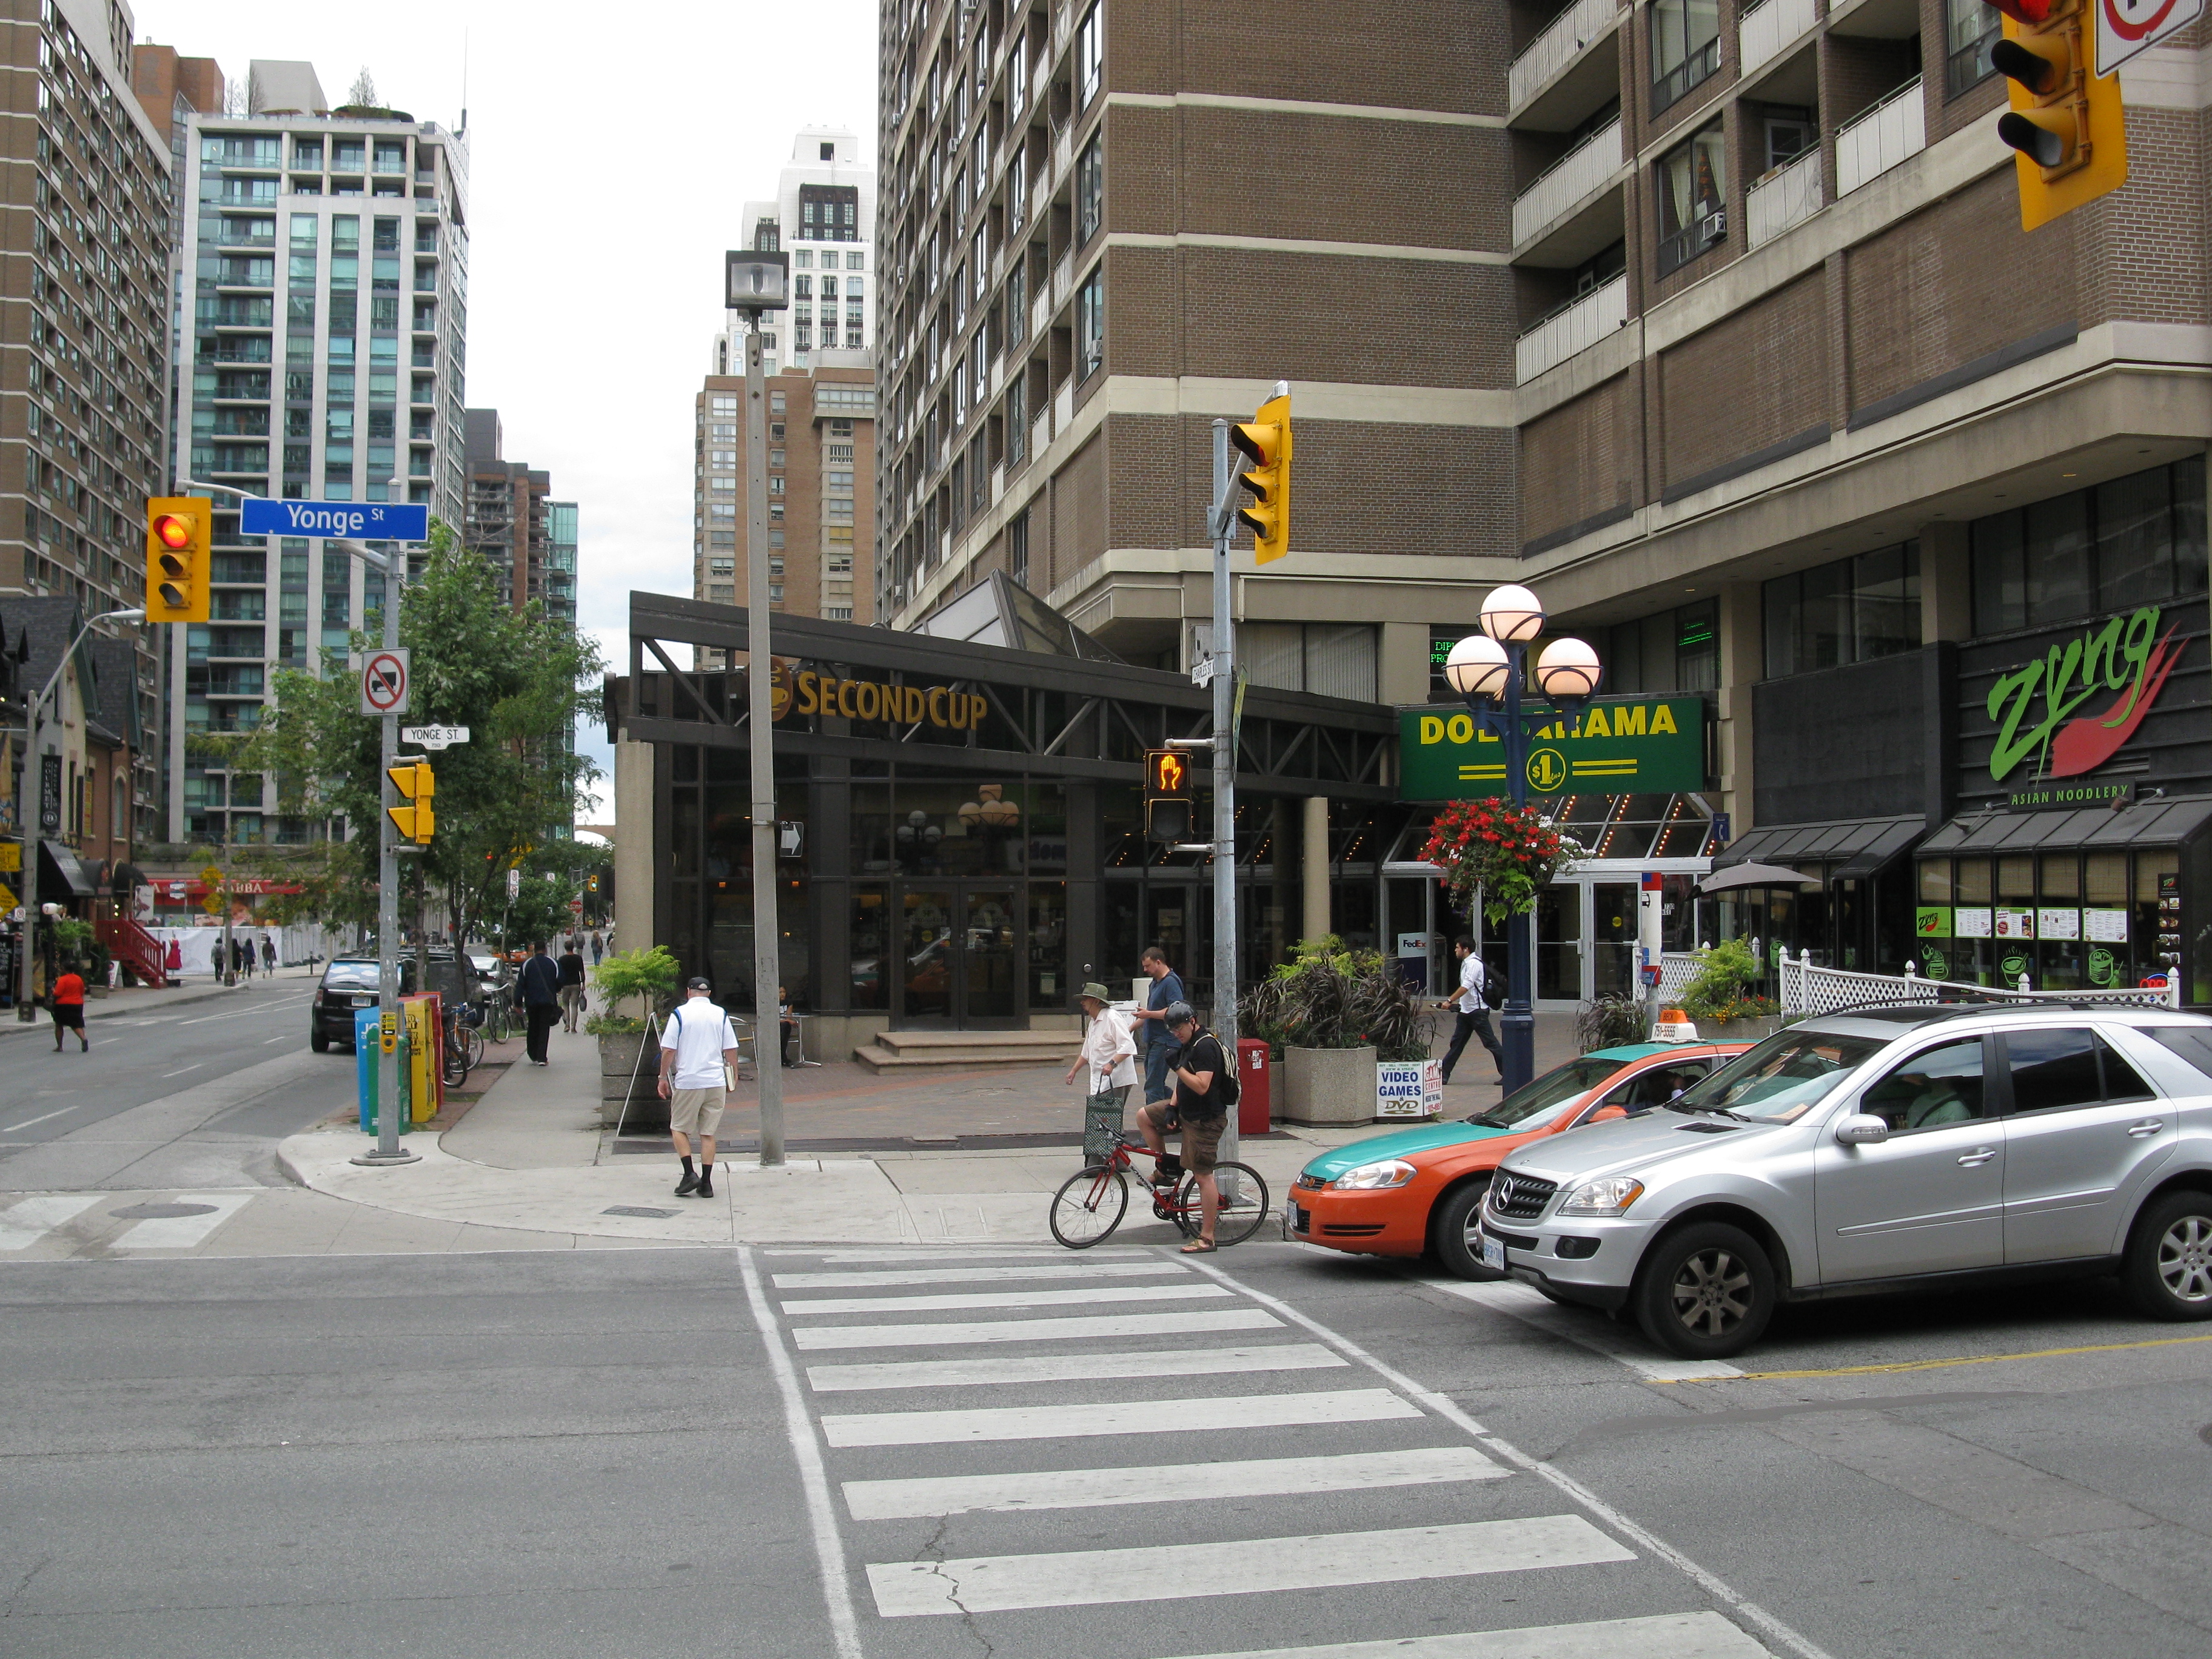 Second cup, yonge and st charles -.jpg photo